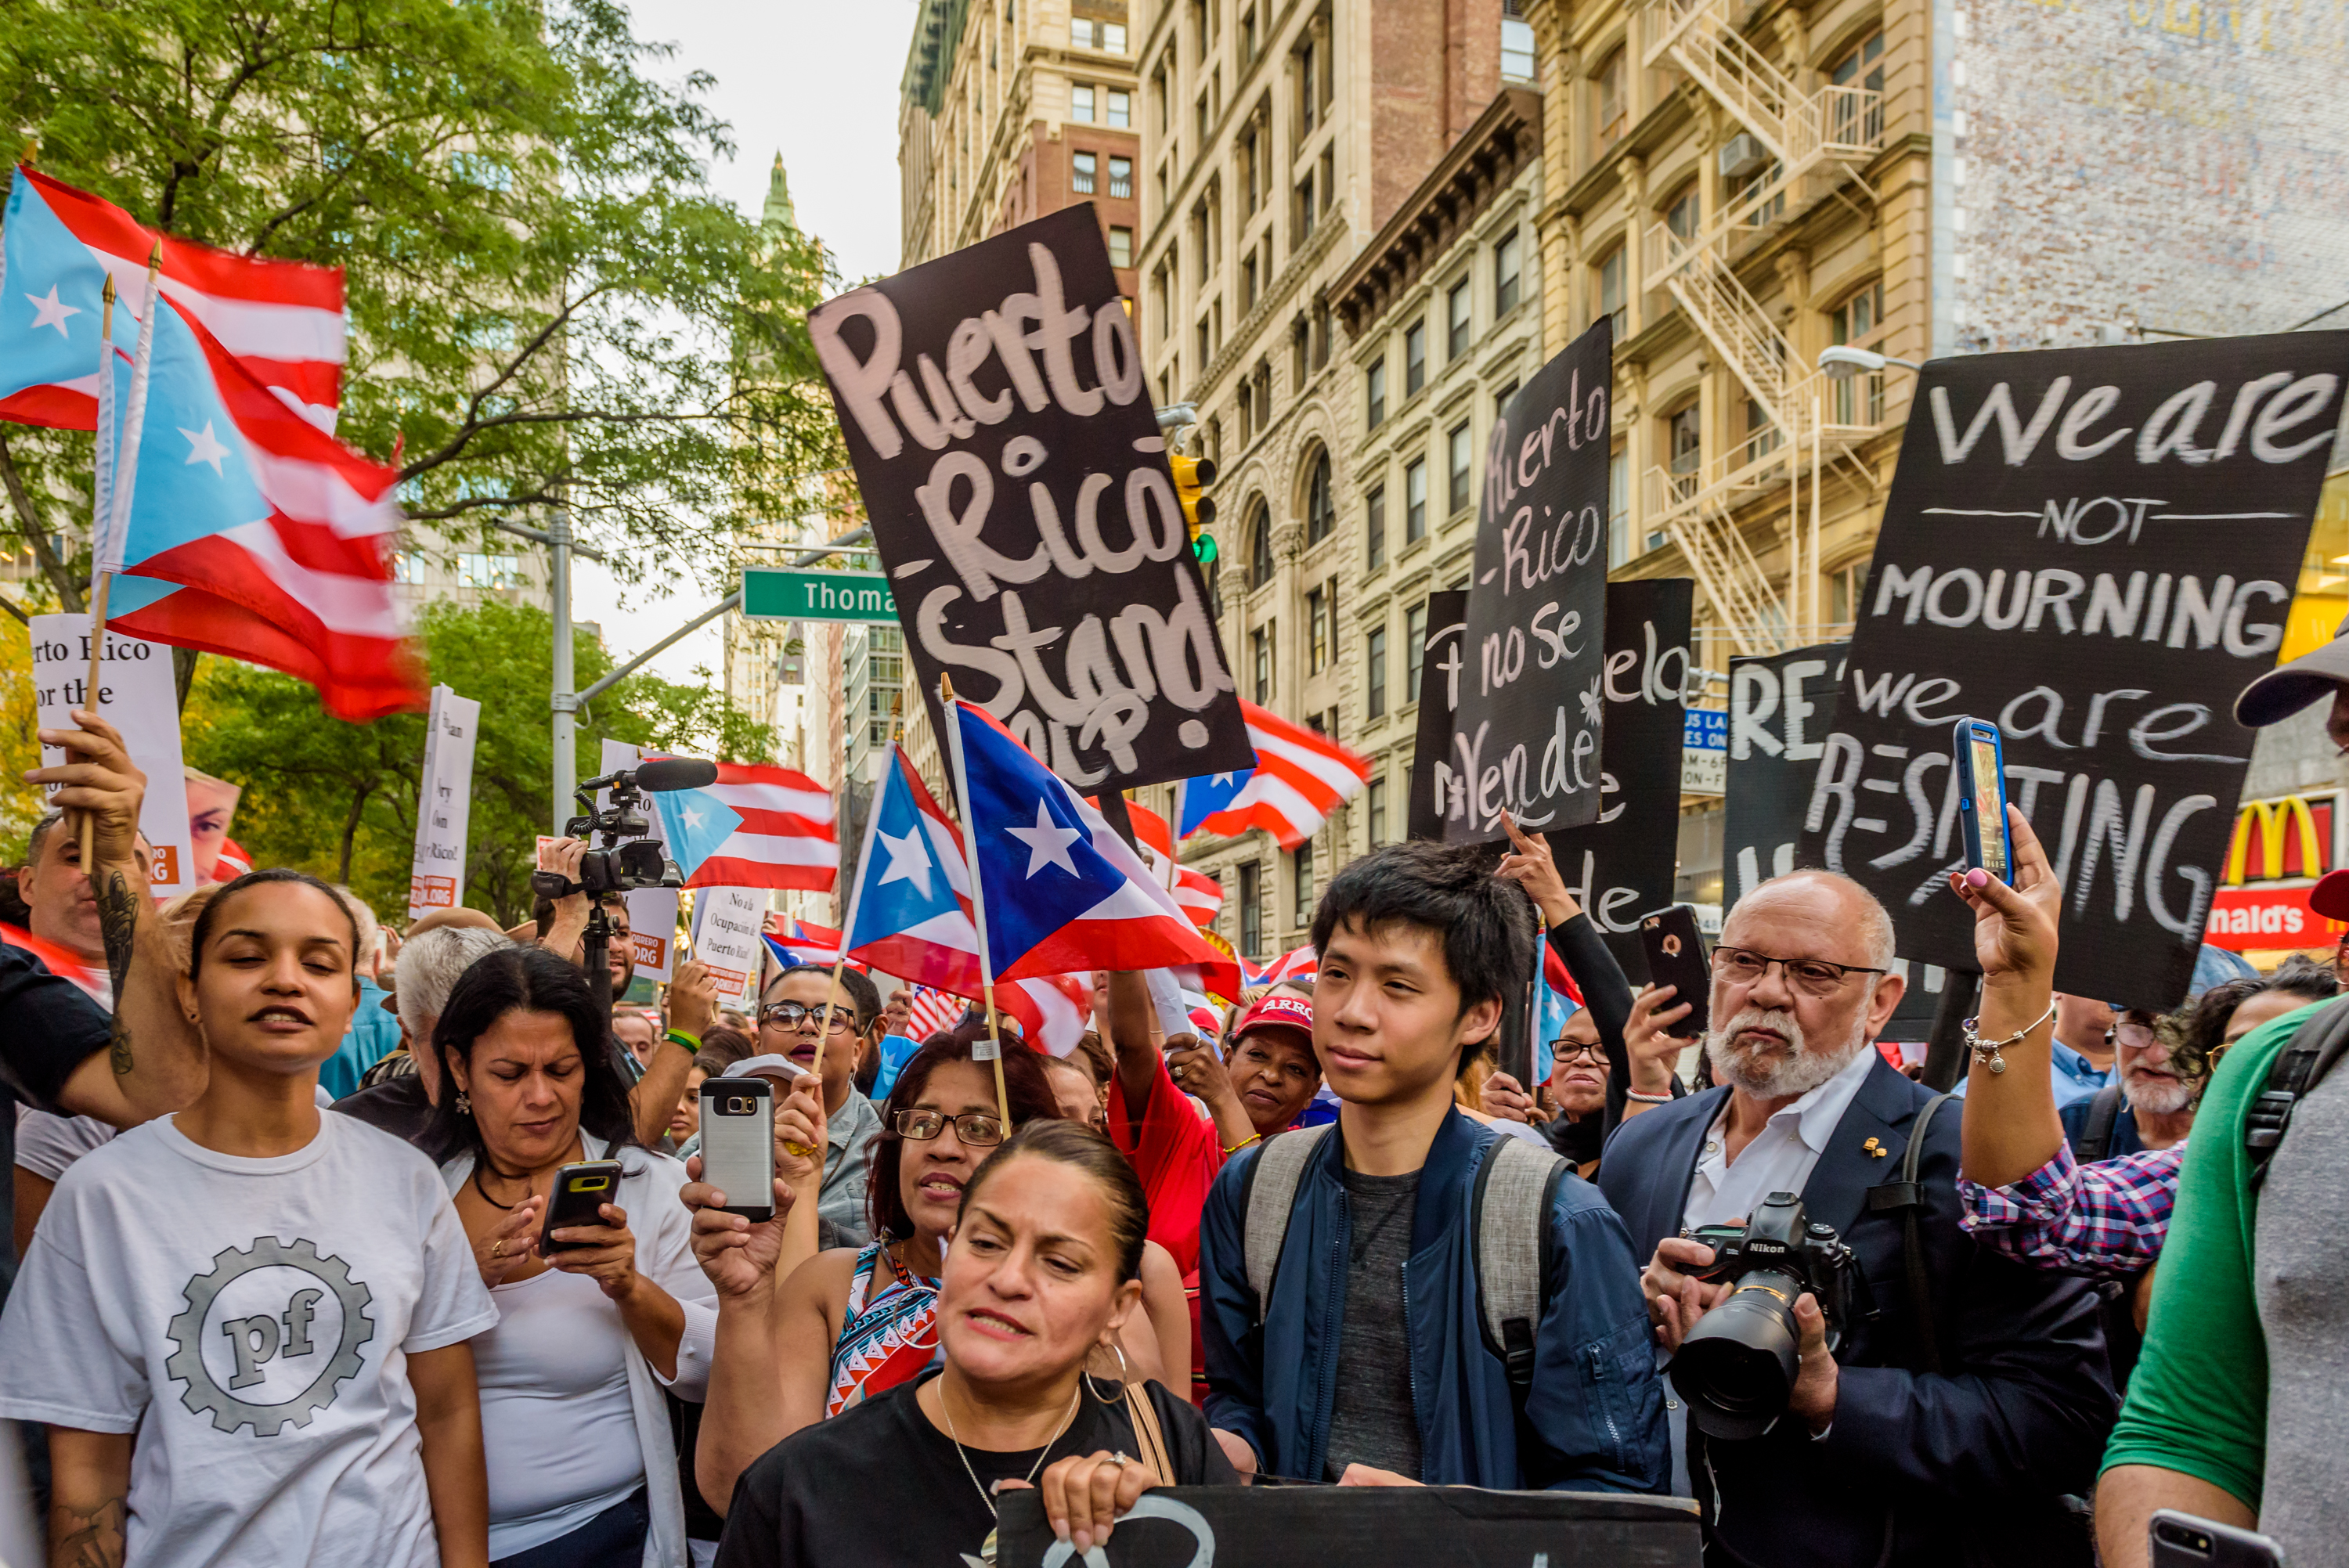 The Puerto Rican community in NYC put out an open call...